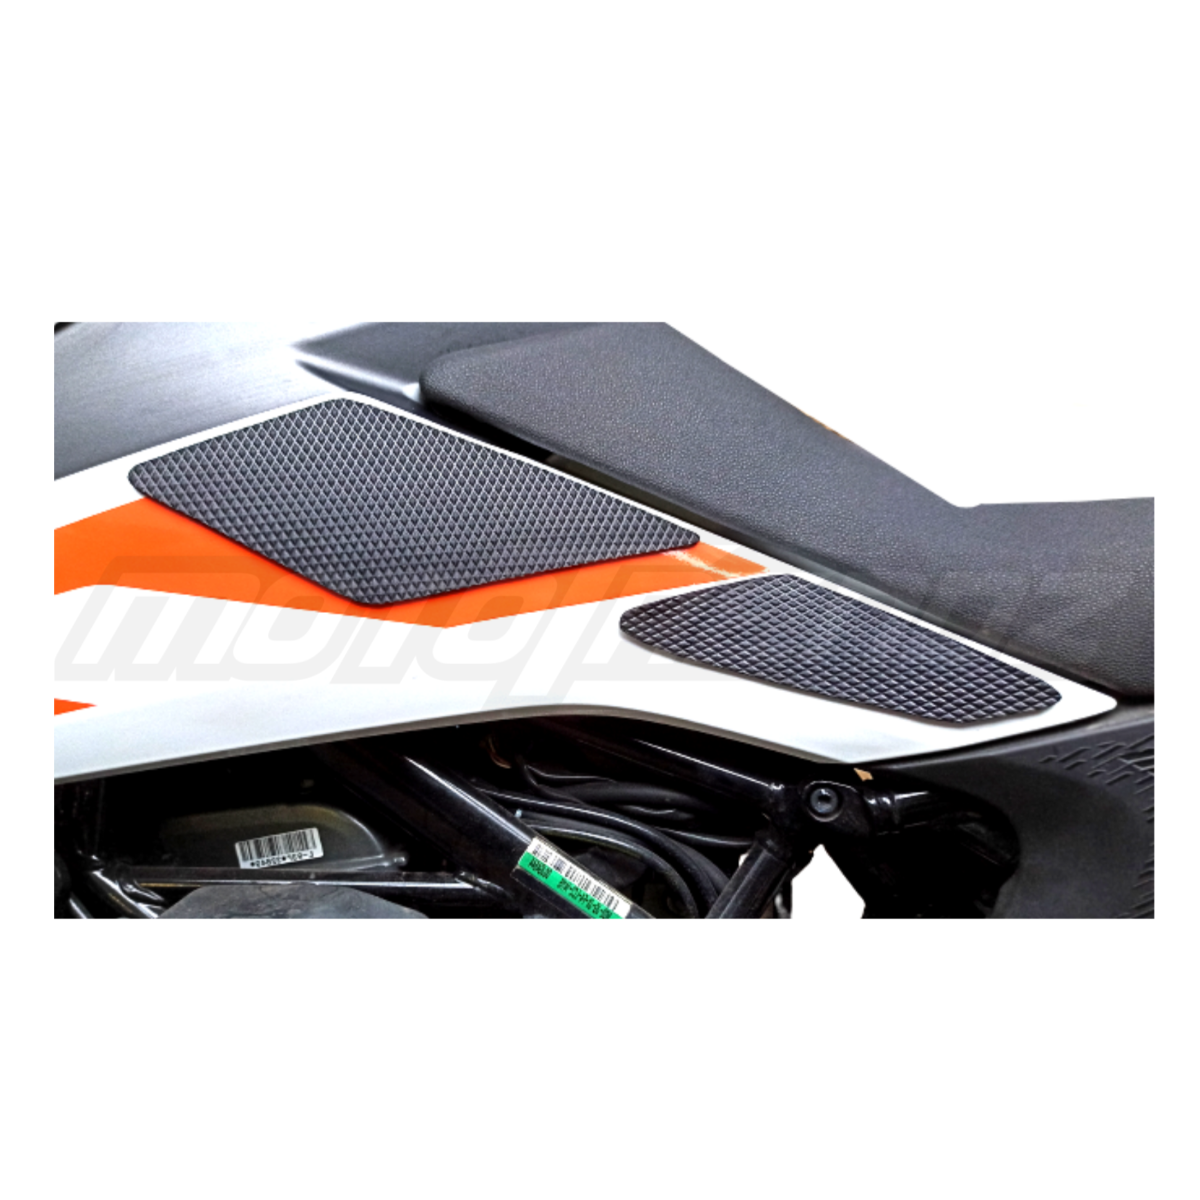 Traction Pads for KTM Adventure 250/390 7